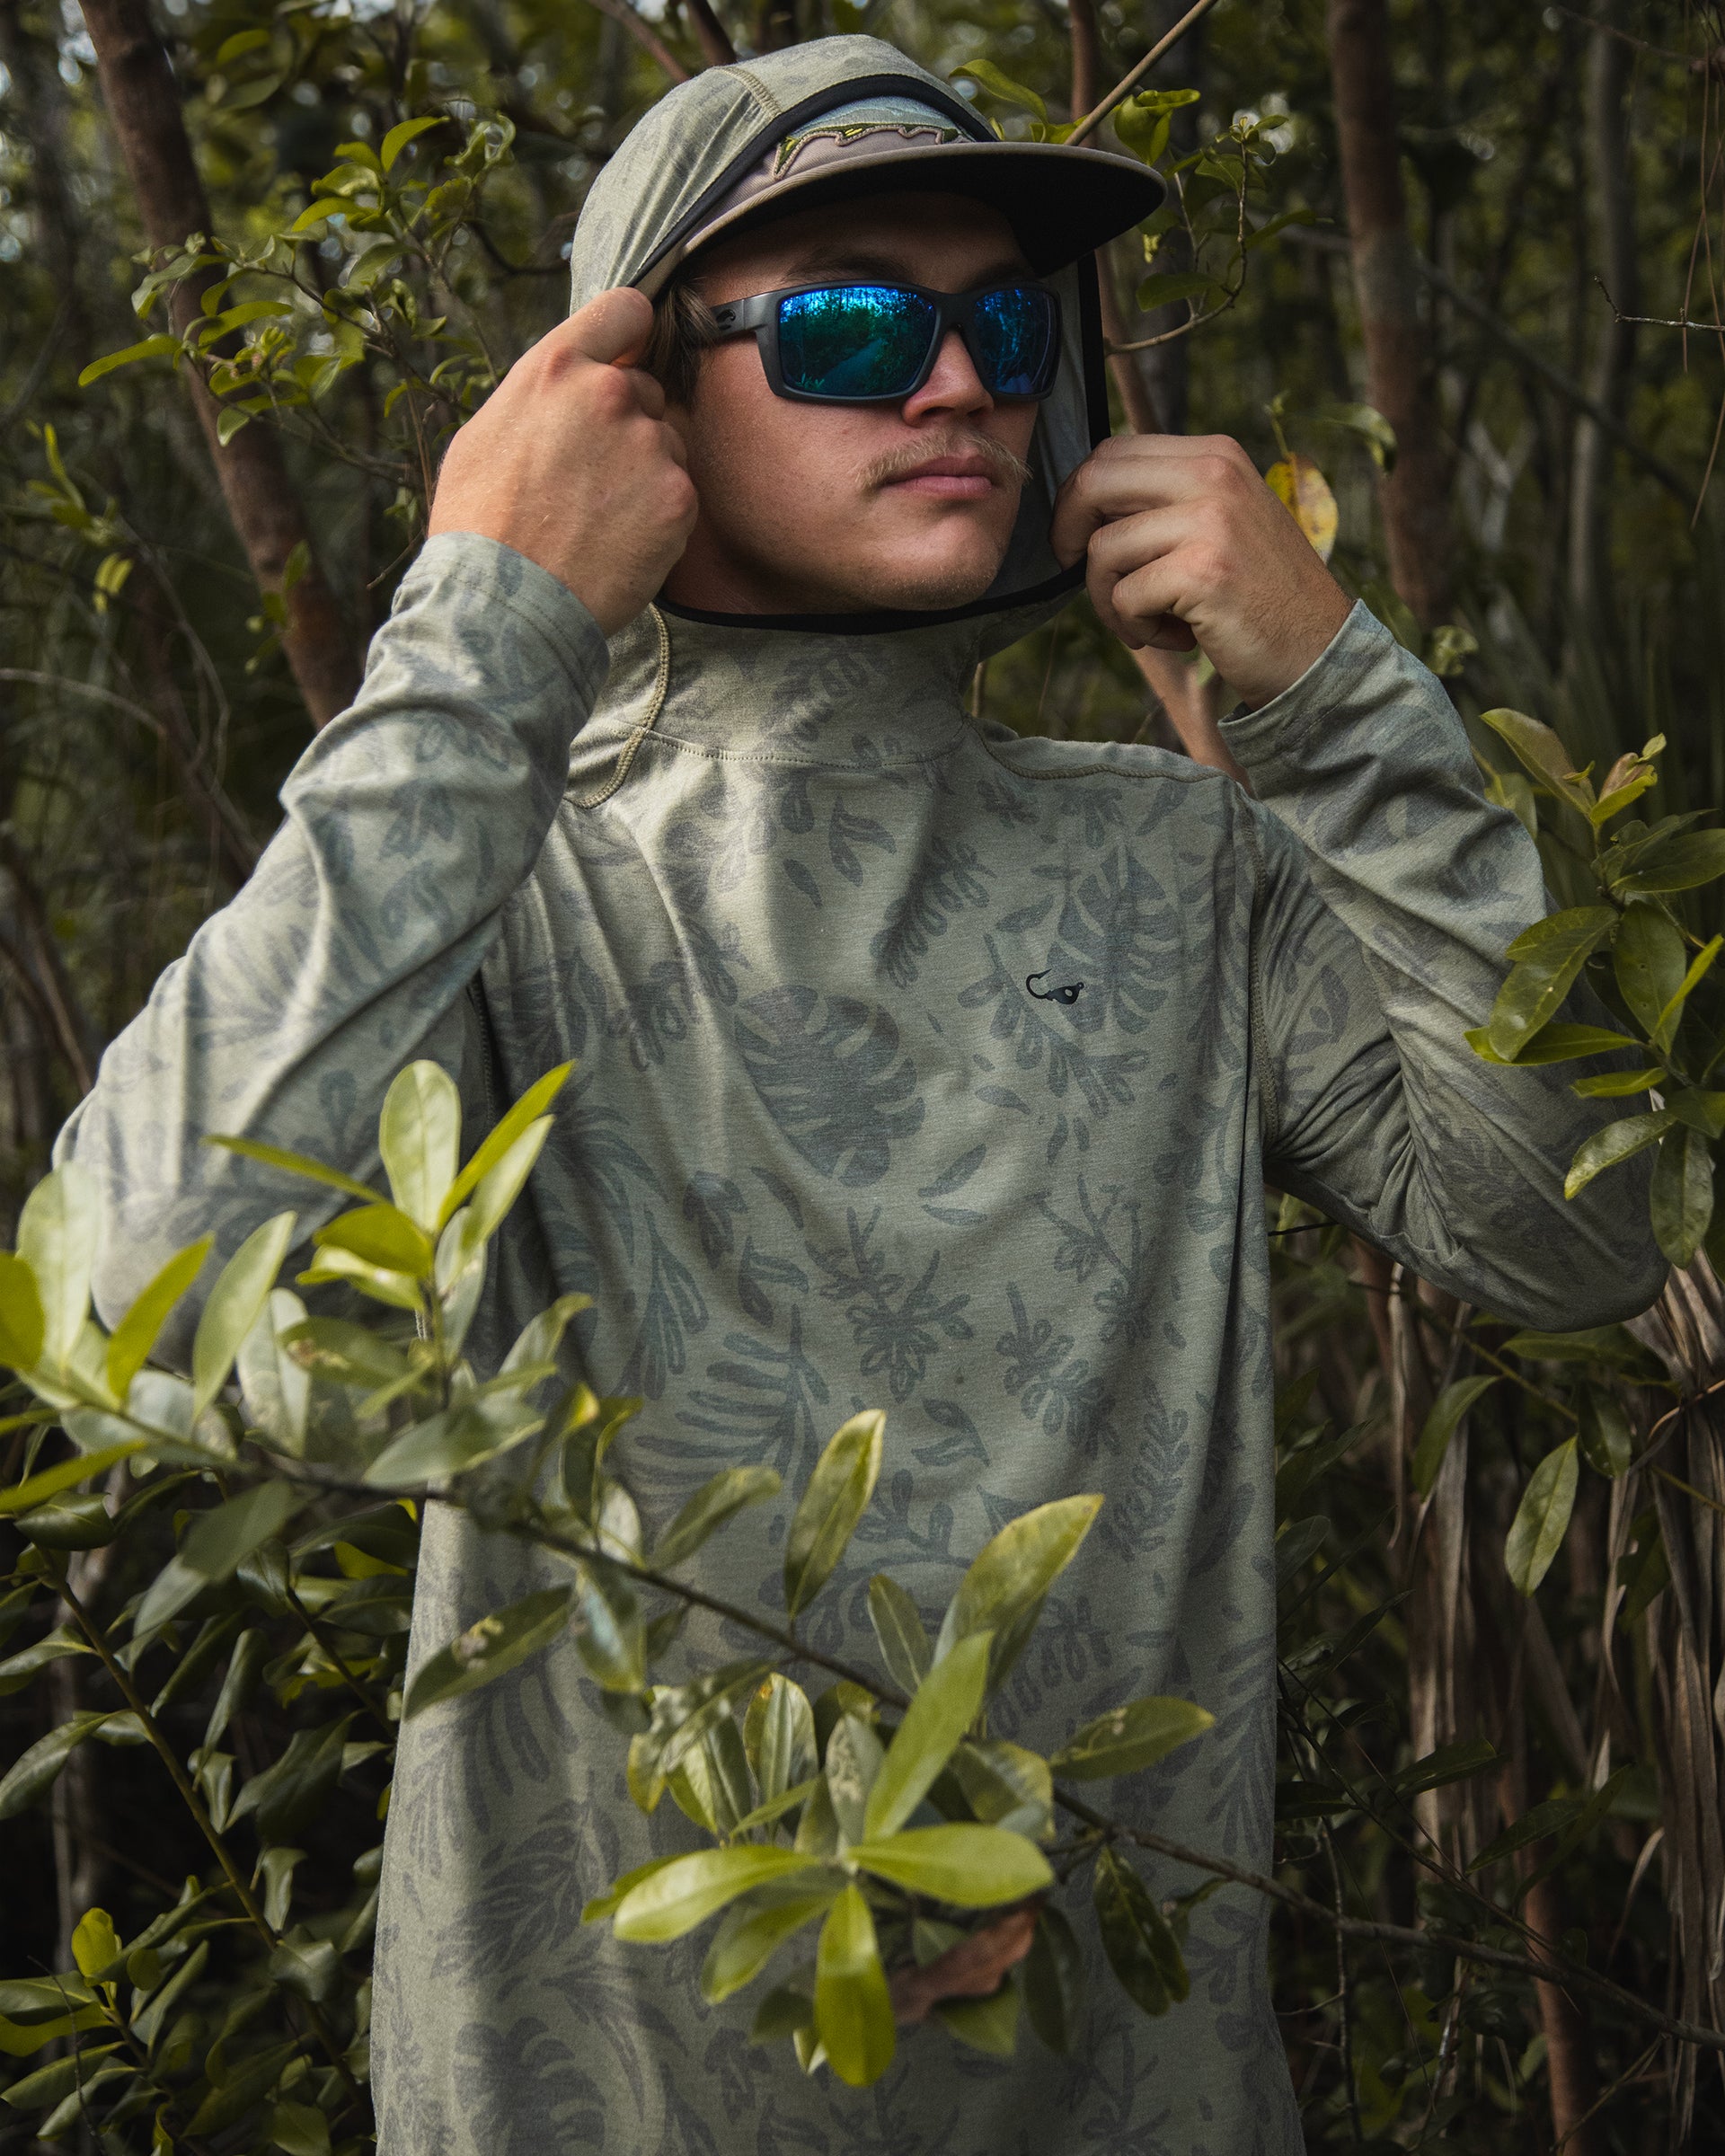 Male model wearing the Jigalode Mighty Jig Performance Fishing Hoodie in moss green with an all-over tropical plant pattern, standing in the picturesque Everglades. The hoodie's hood is on, providing extra protection from the sun. With UPF 30 sun protection and moisture-wicking properties, this hoodie is perfect for outdoor adventures. The model showcases the hoodie's versatility and performance in a stunning natural setting.